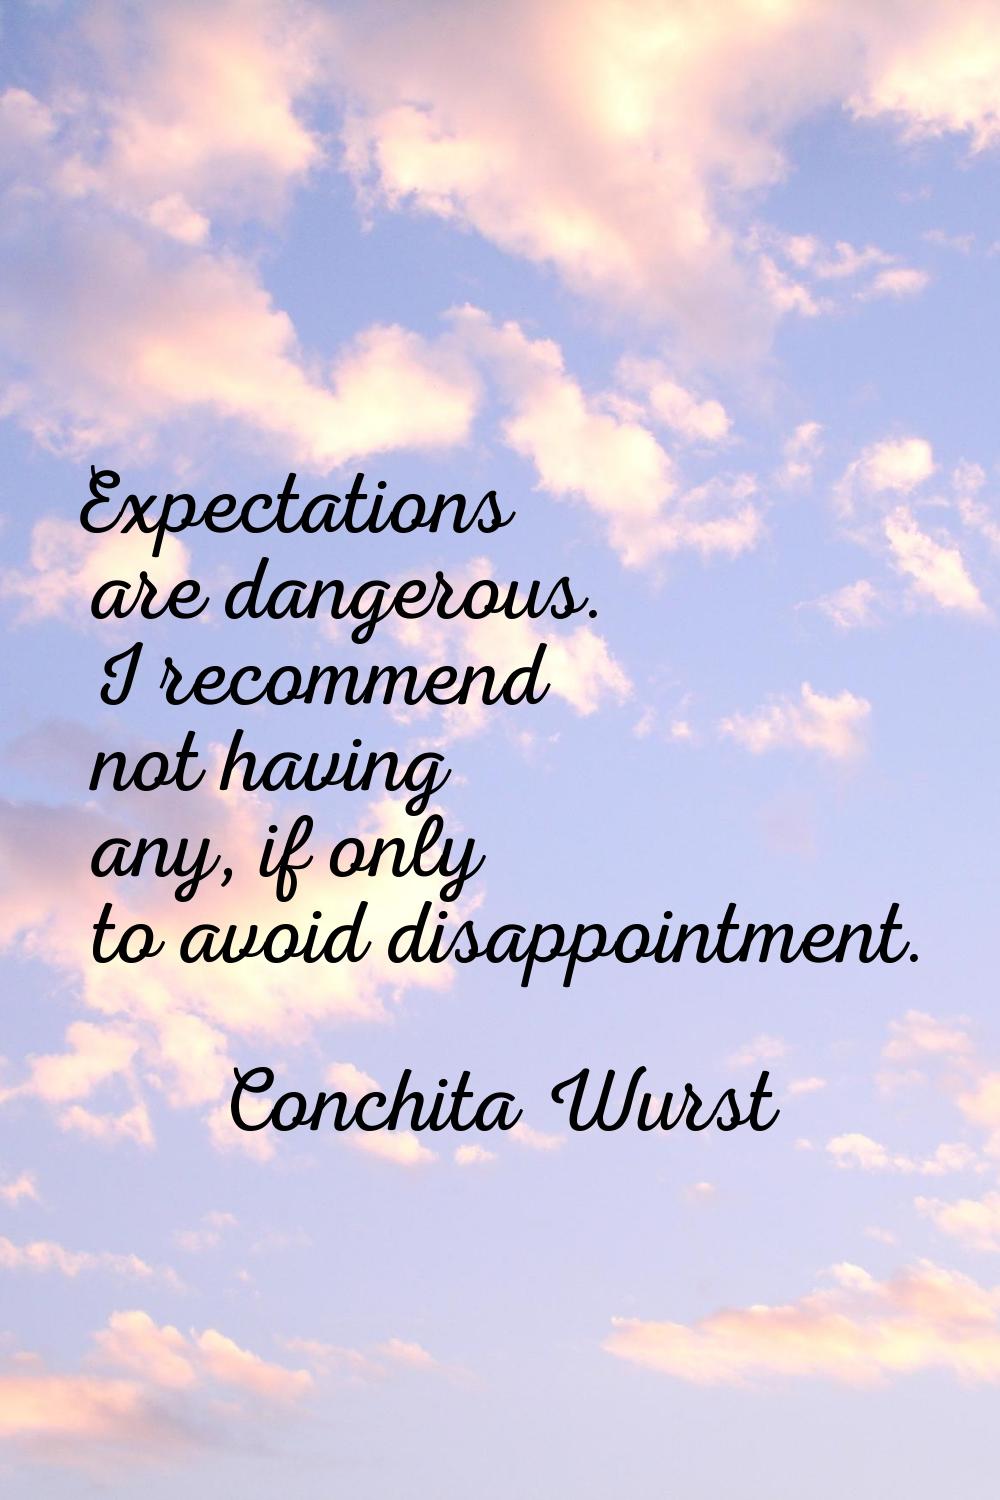 Expectations are dangerous. I recommend not having any, if only to avoid disappointment.